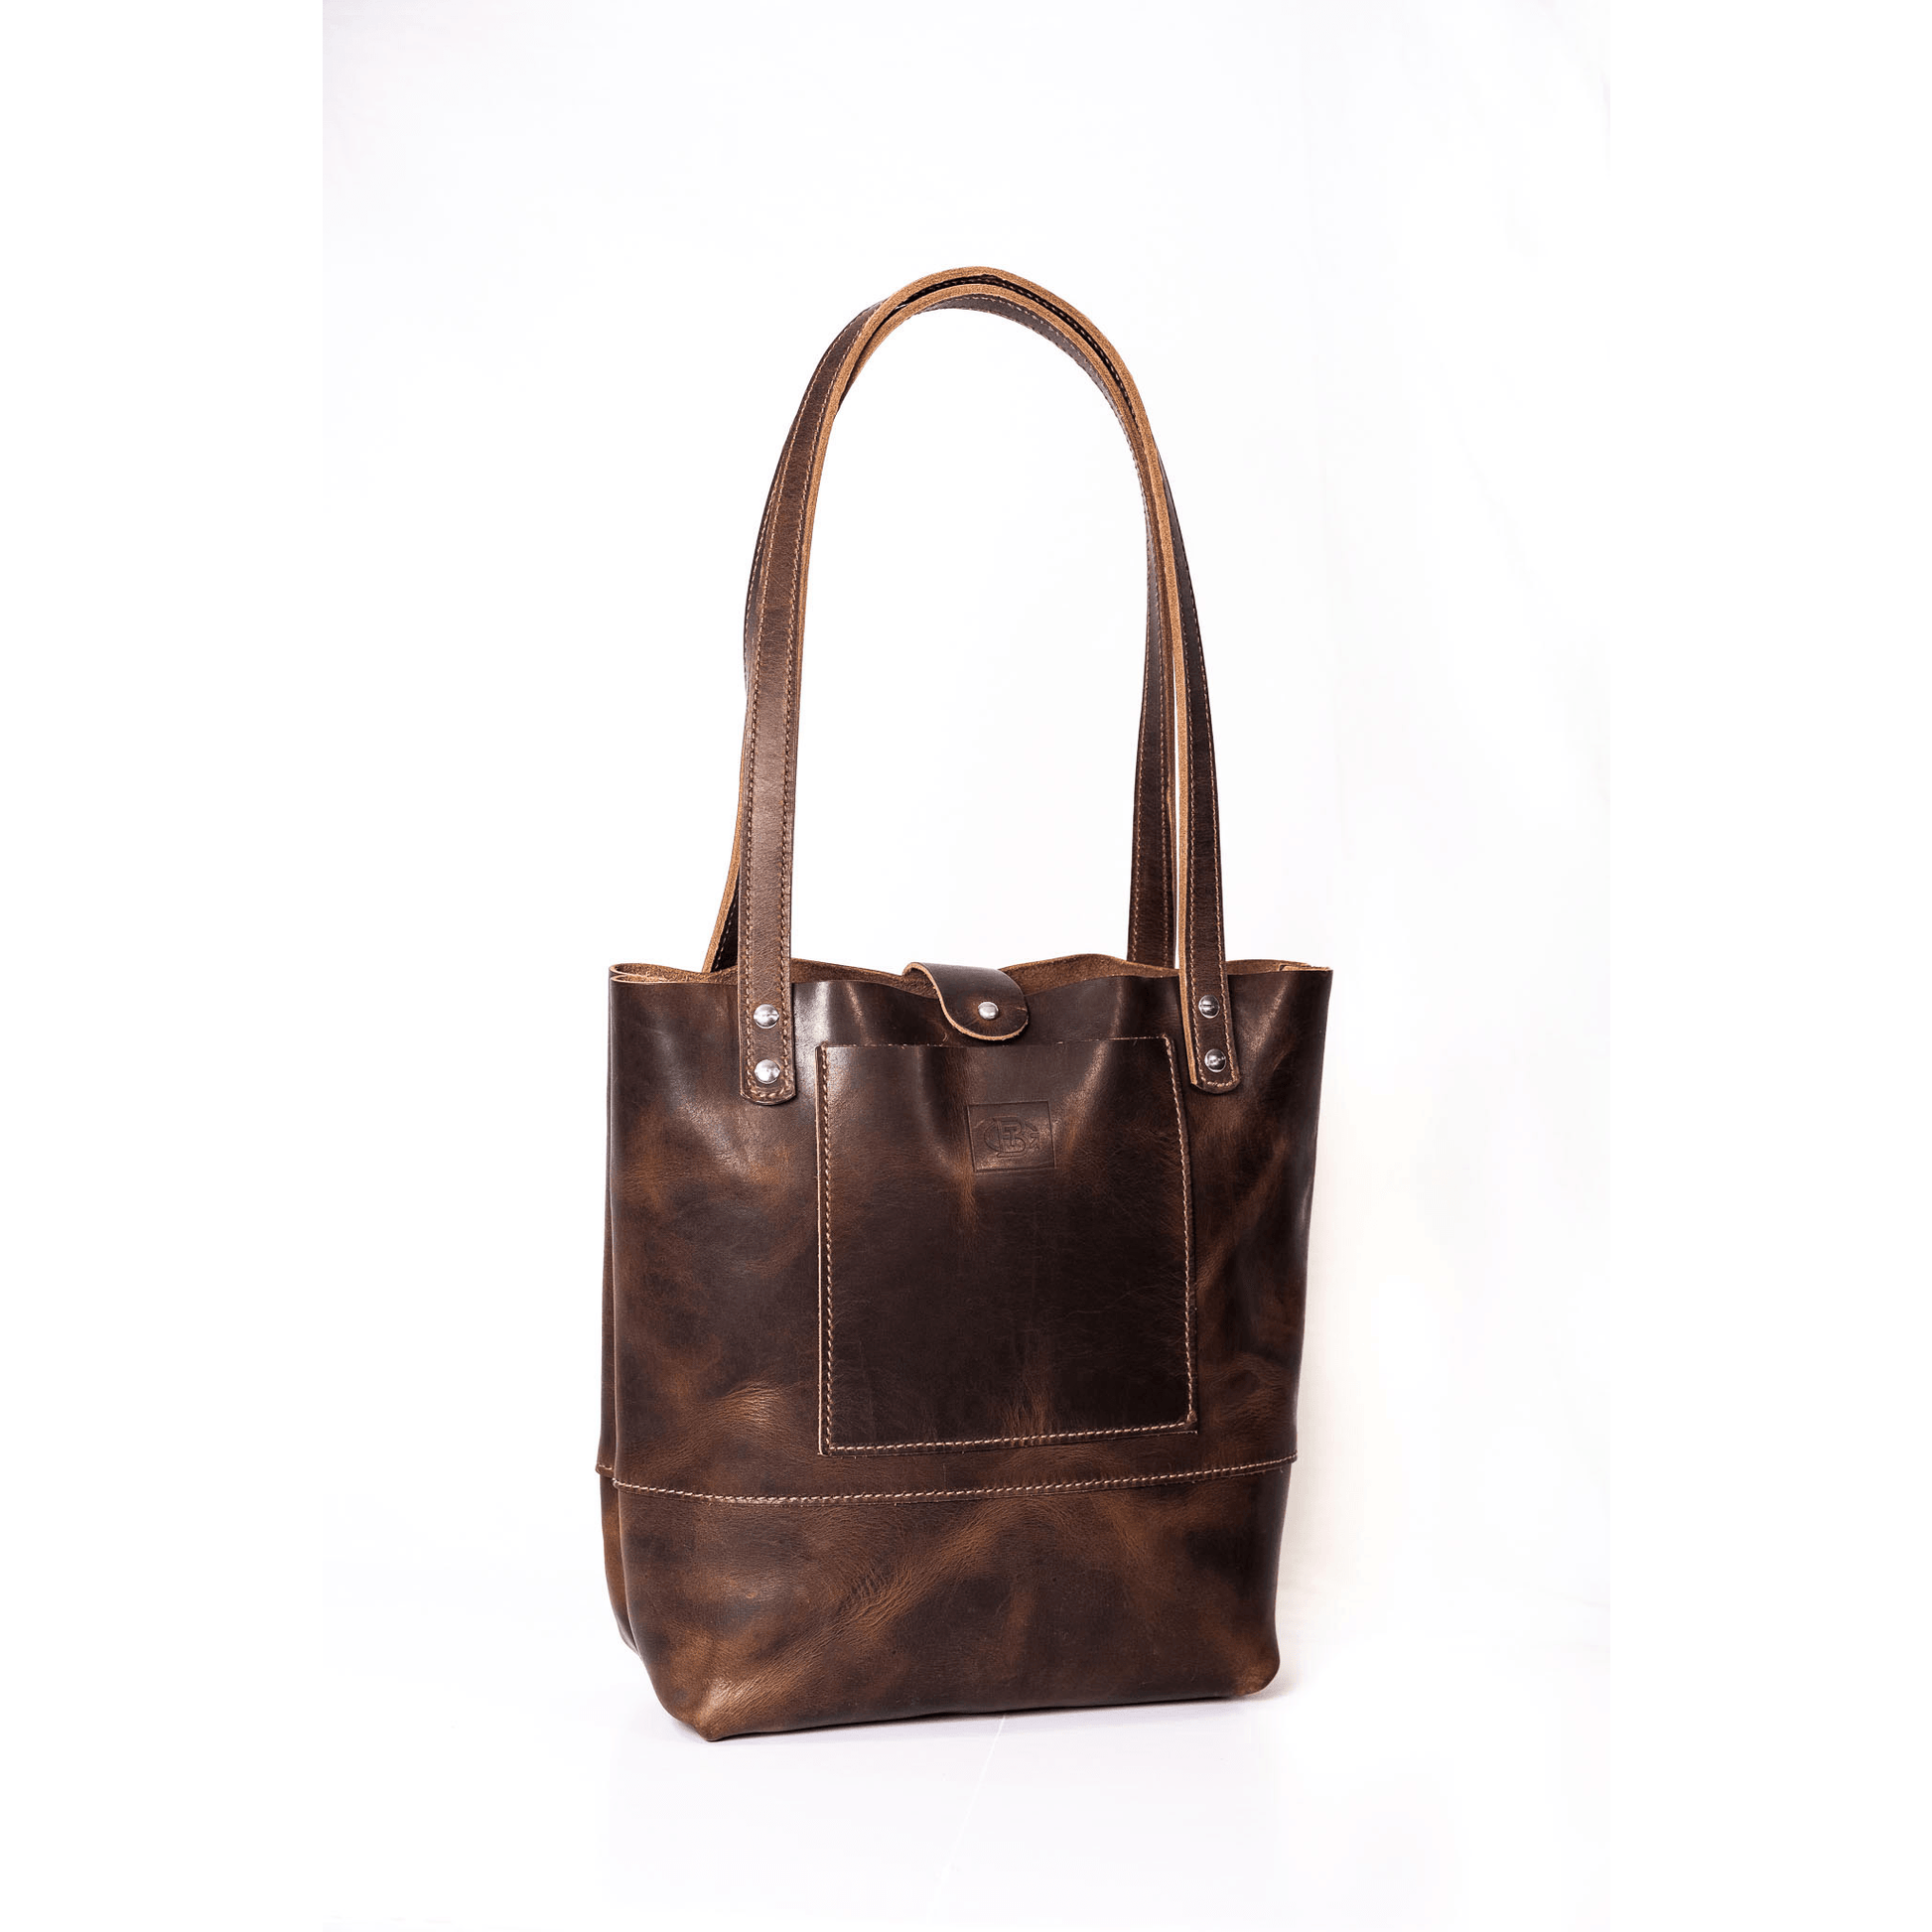 Luxury Leather Tote in Brown Nut